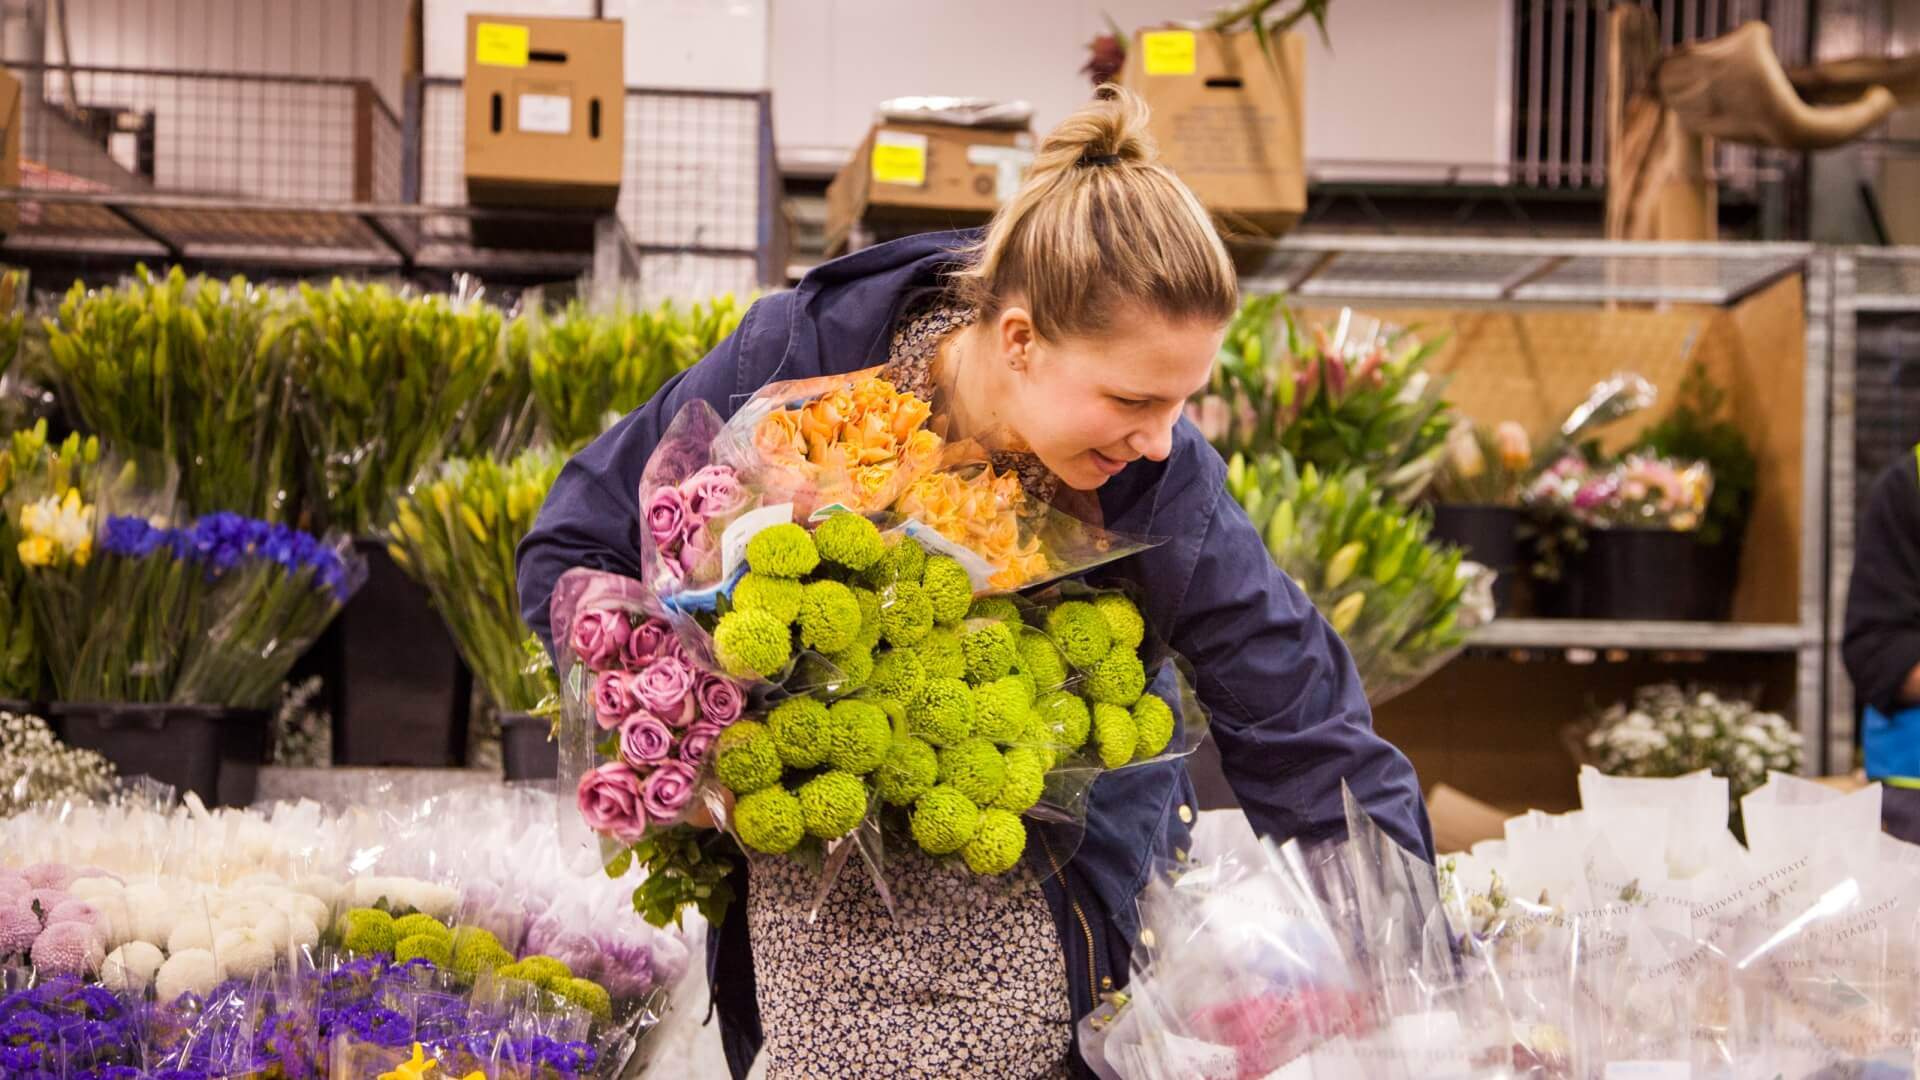 Merivale Are Opening Their Own Bespoke Flower Shop